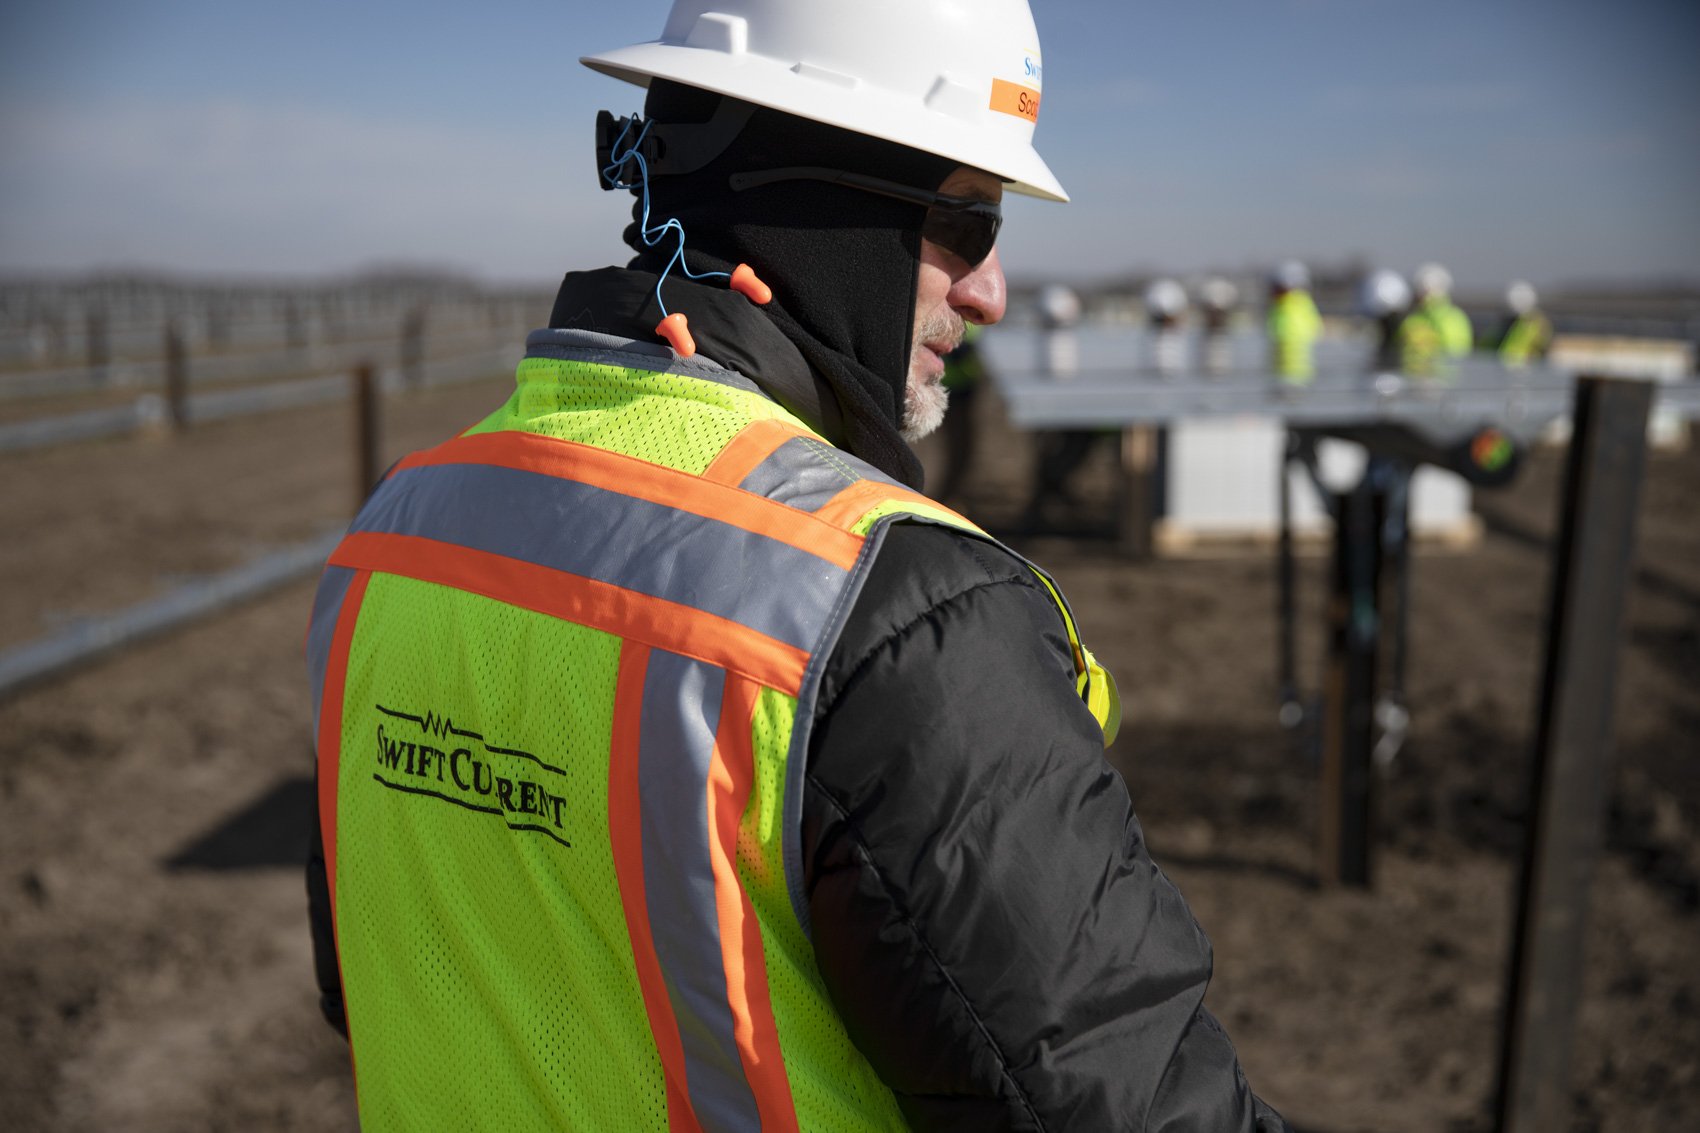  Swift Current Double Black Diamond solar project in southeast Sangamon County, first day of panel installation Monday, March 20, 2023  near Virden, Ill. [Rich Saal] 